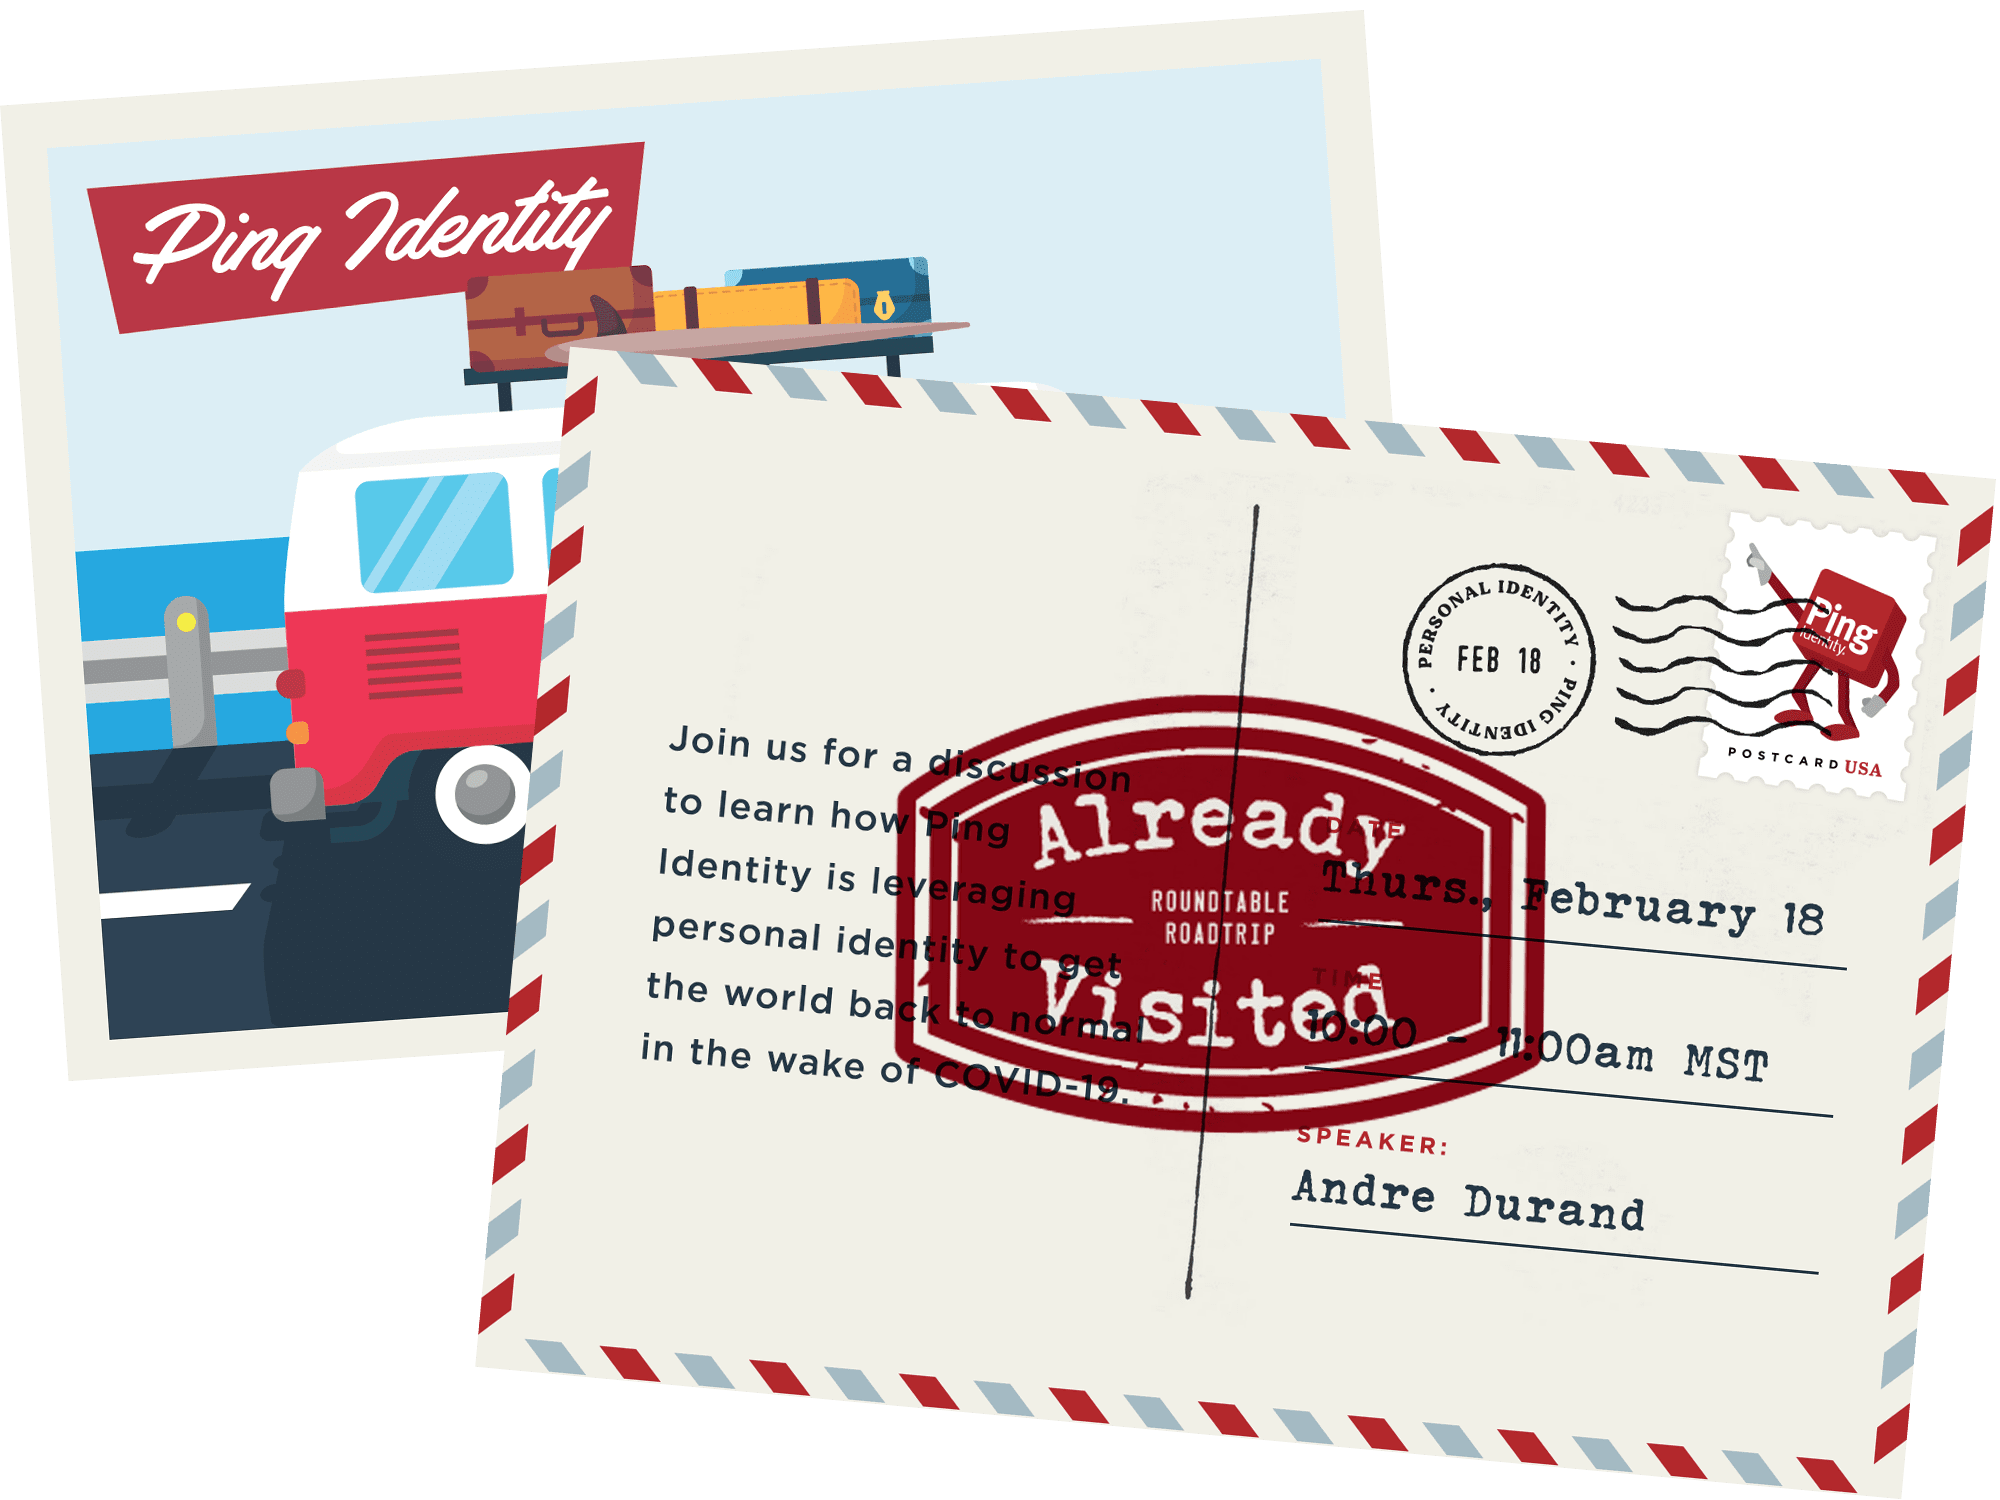 Already visited road trip postcard with vehicle